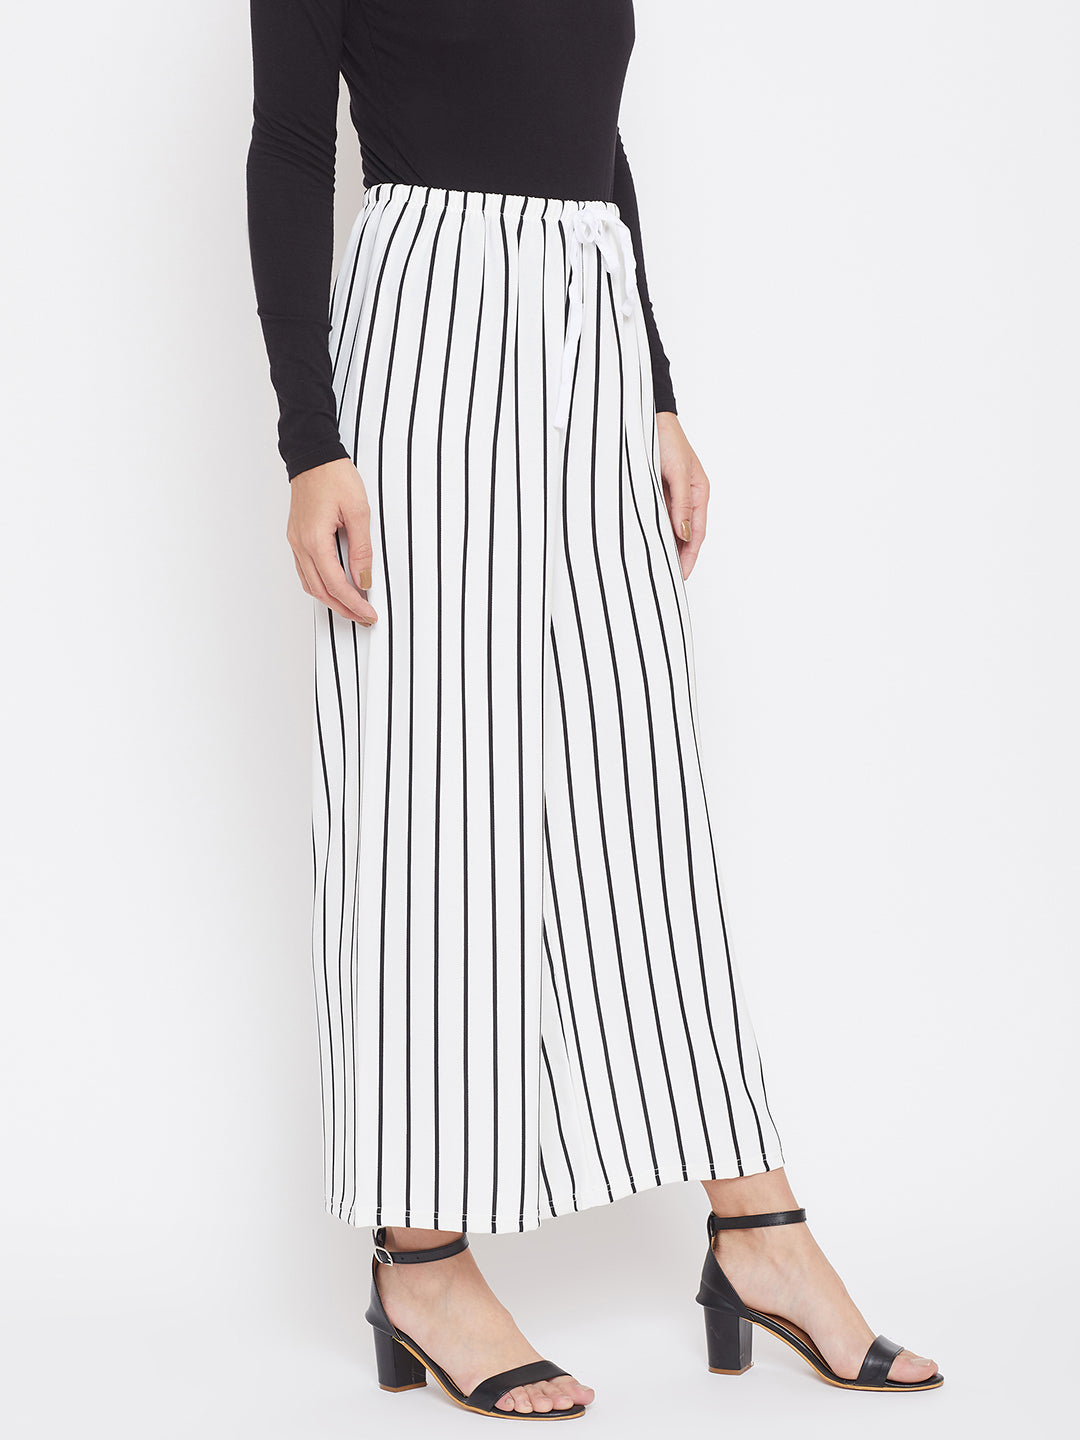 Striped Flared Parallel Trousers - Women Trousers